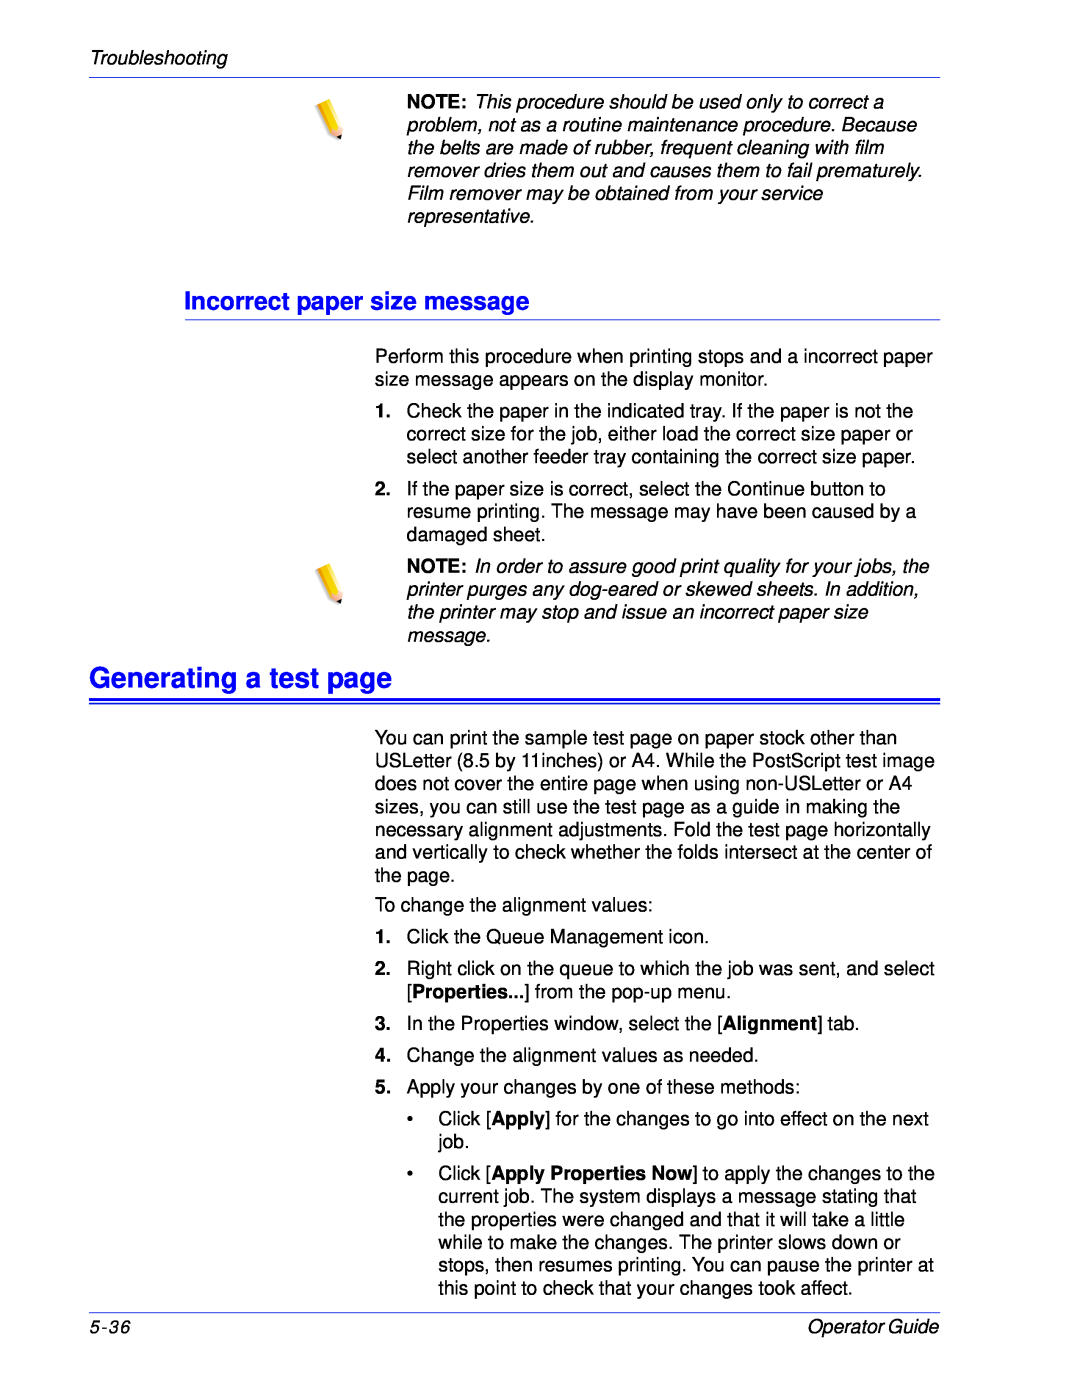 Xerox 100, 180 EPS manual Generating a test page, Incorrect paper size message, Troubleshooting 